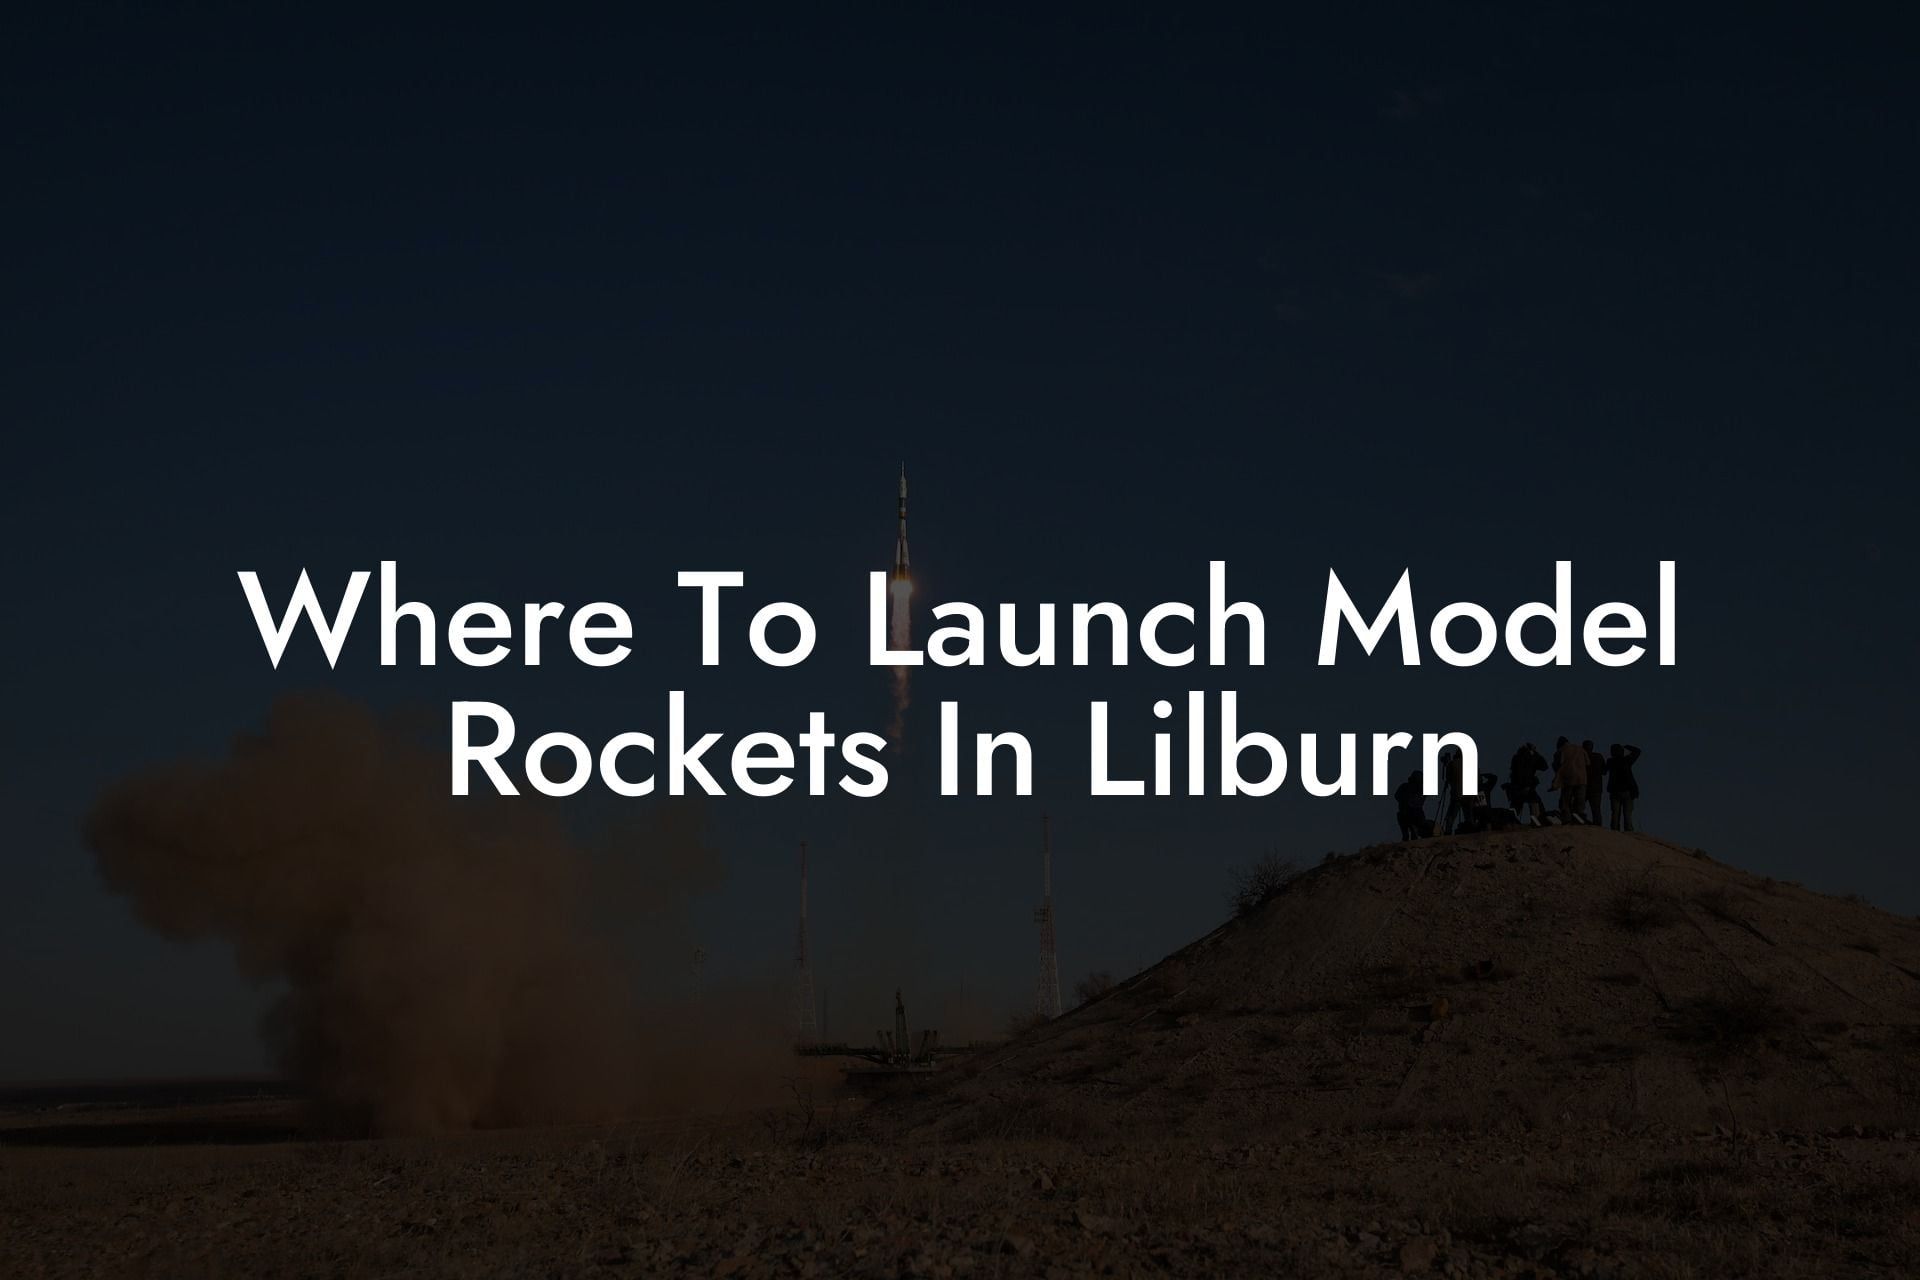 Where To Launch Model Rockets In Lilburn